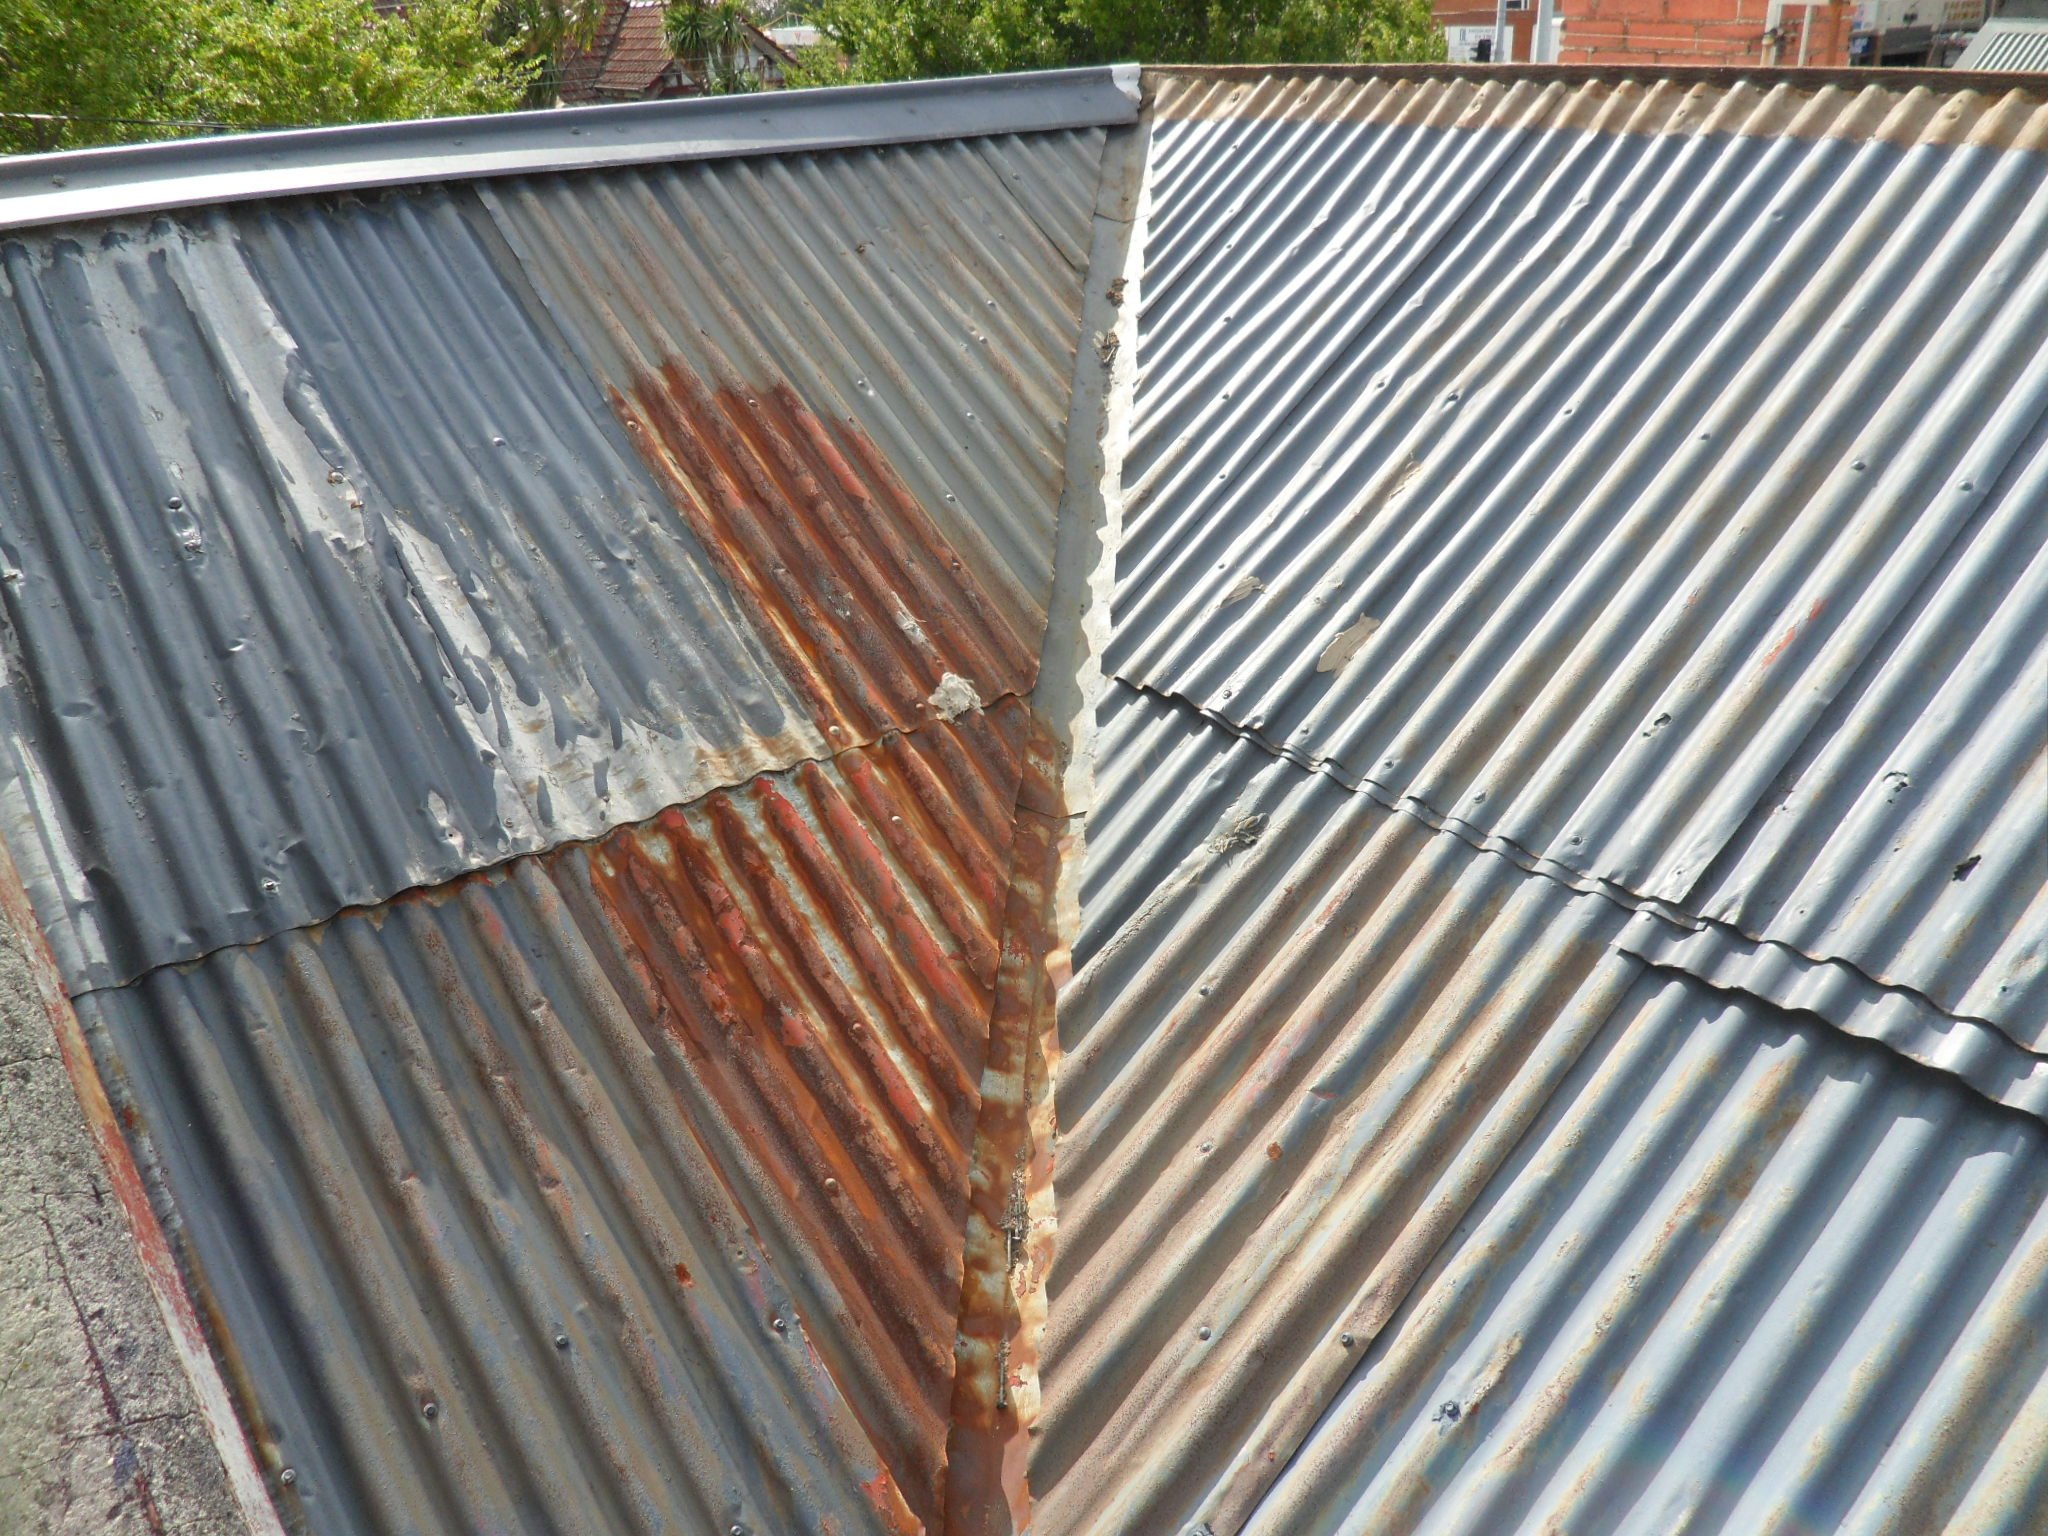 Rusted metal roof